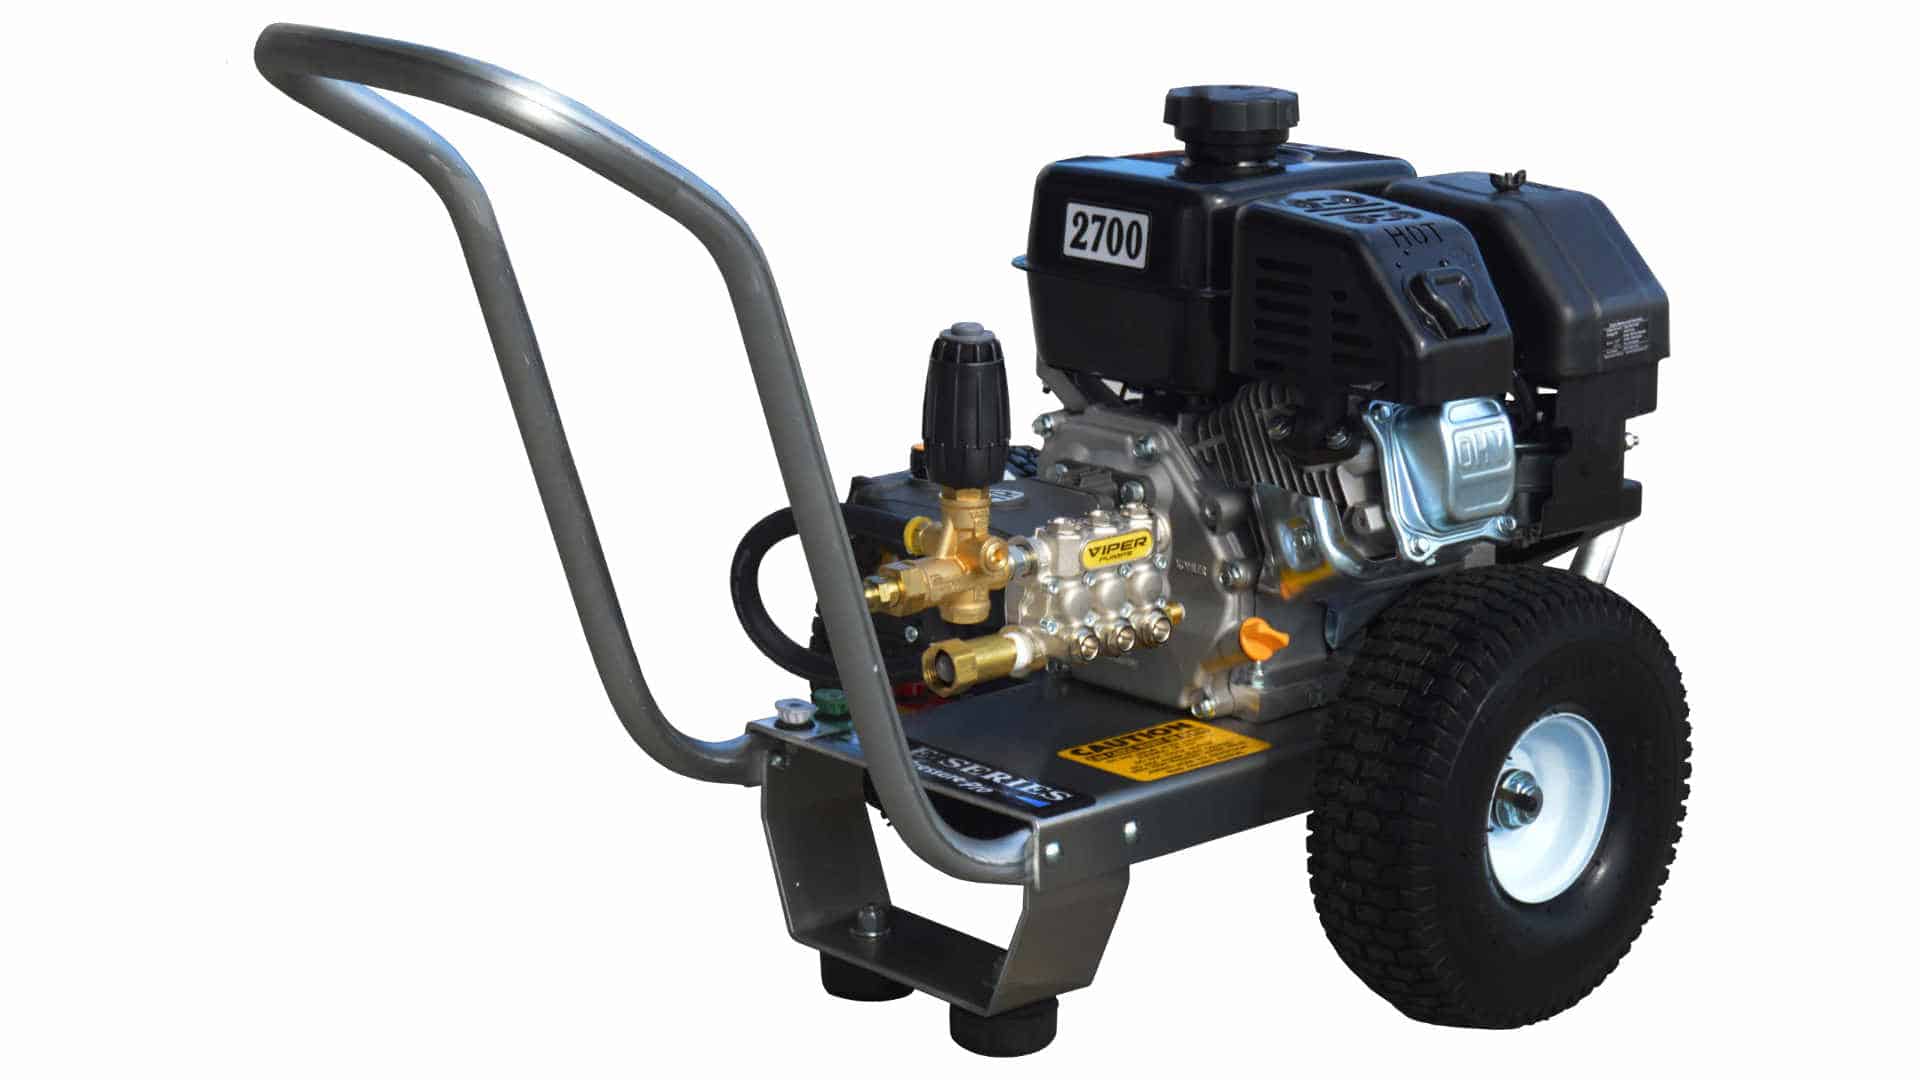 A pressure washer machine with a gasoline engine, metal frame, black handle, and large wheels. The unit is labeled "2700" and features various nozzles and connections.